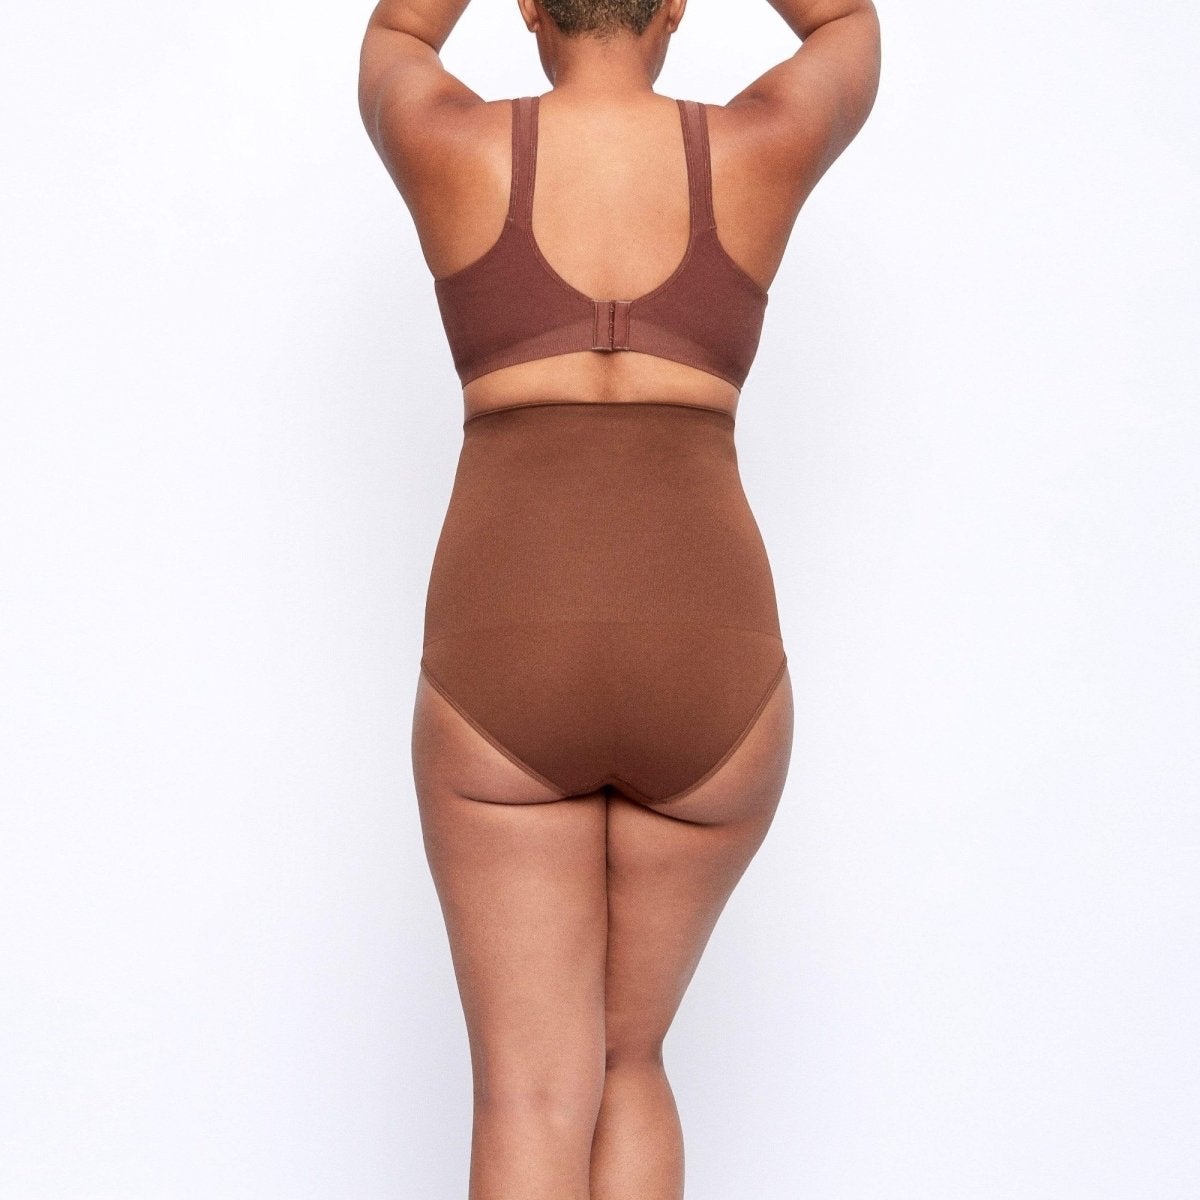 "Must Have" High Waist Panty Brief - Cocoa - Underoutfit - UN-HWB-796-S-COA